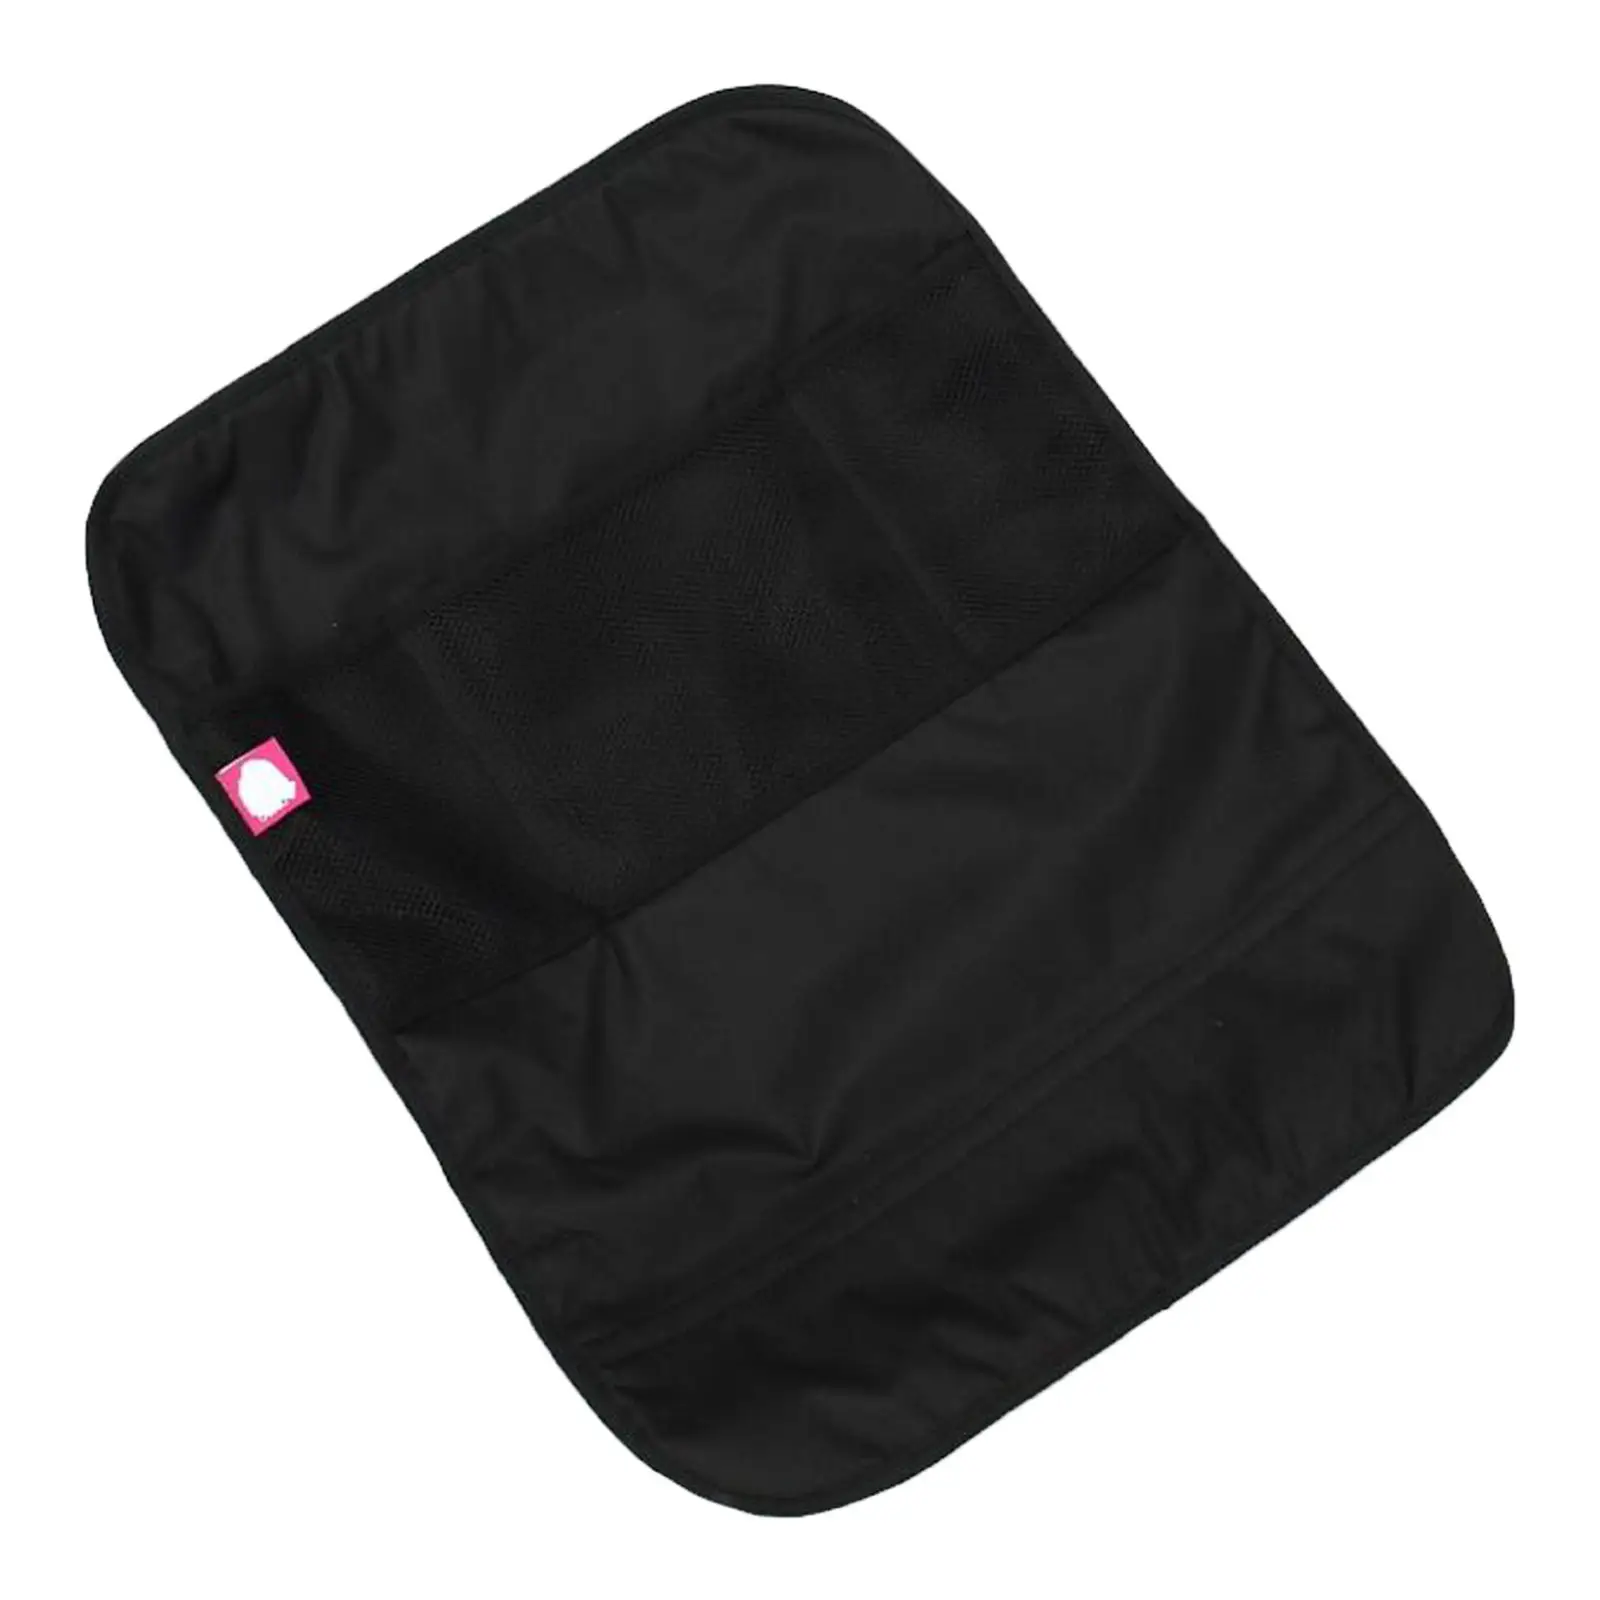 Auto Prevent Trampling Storage Bag Three-Layer Seat Back Anti Kick Pad Auto Back Seat Storage Cover Protector Fit for Kids